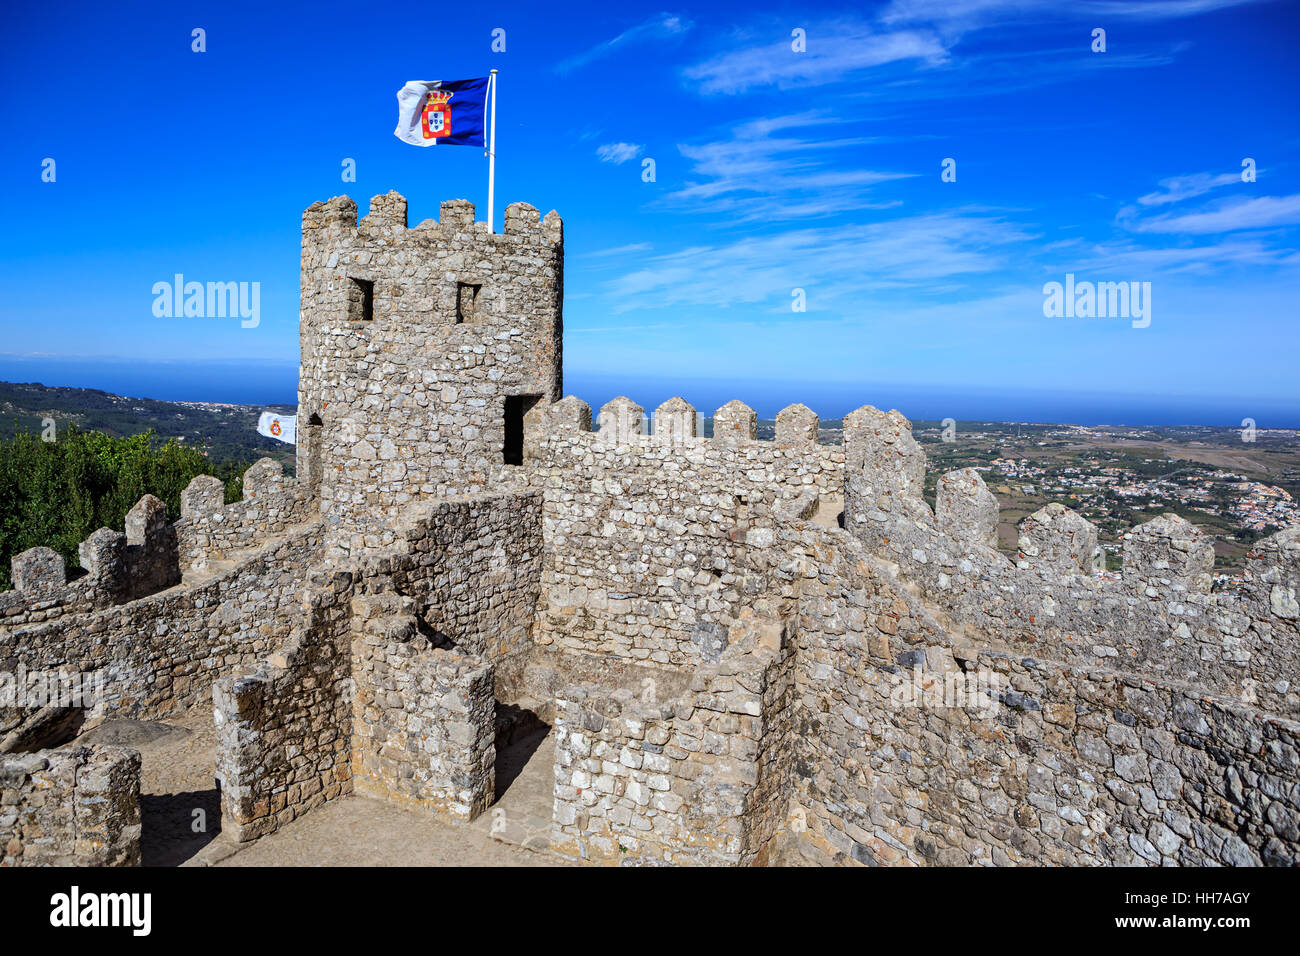 SINTRA, PORTUGAL - CIRCA OCTOBER, 2016:  The Castelo dos Mouros alias The Castle of the Moors in Sintra, Portugal Stock Photo